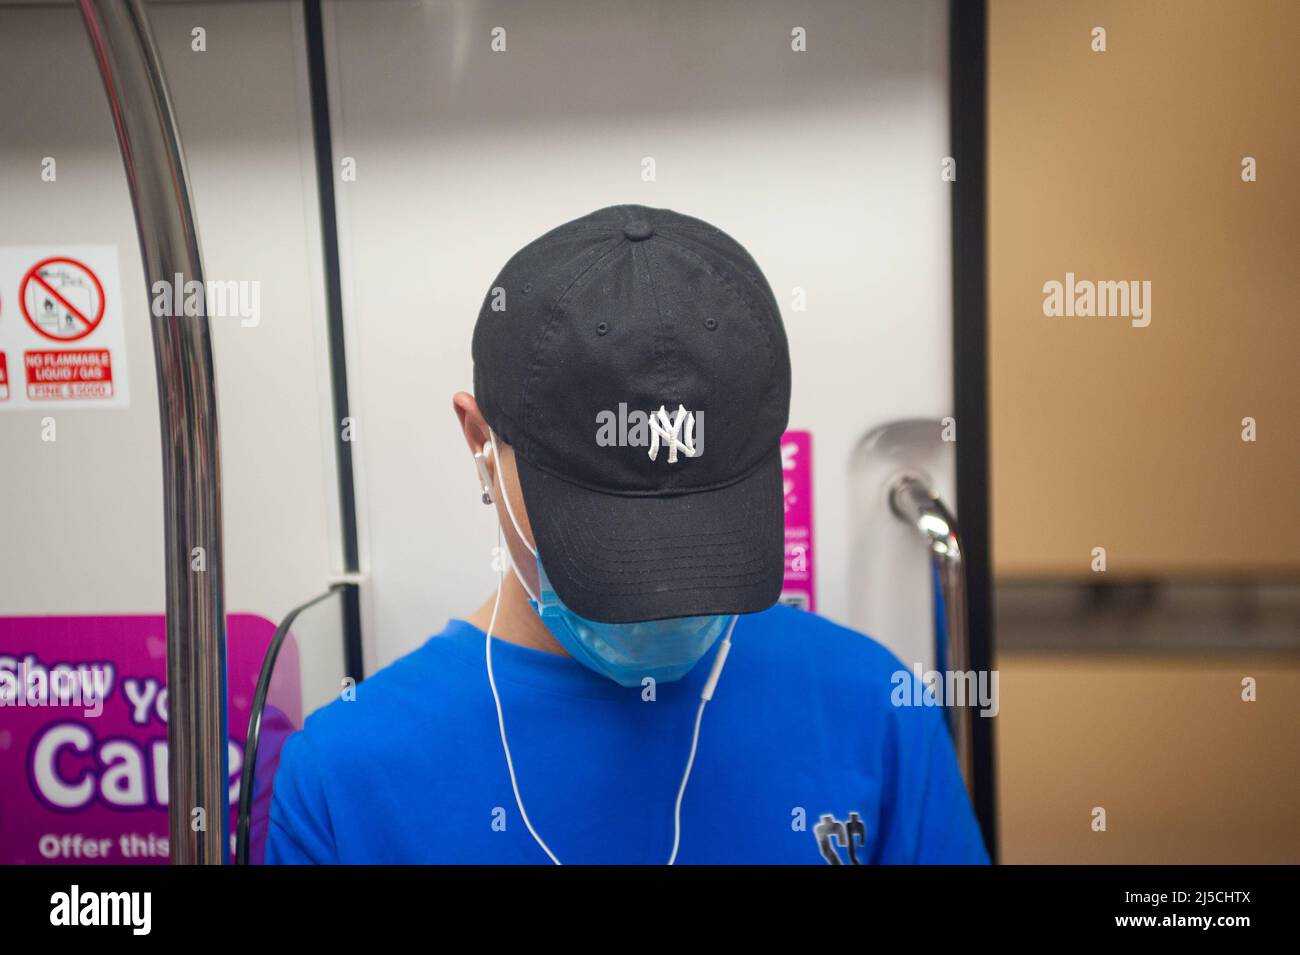 Feb. 28, 2020, Singapore, Republic of Singapore, Asia - A young man wears a respirator on a subway to protect himself from contracting the pandemic coronavirus. He is wearing a baseball cap with the logo of the New York Yankees. [automated translation] Stock Photo